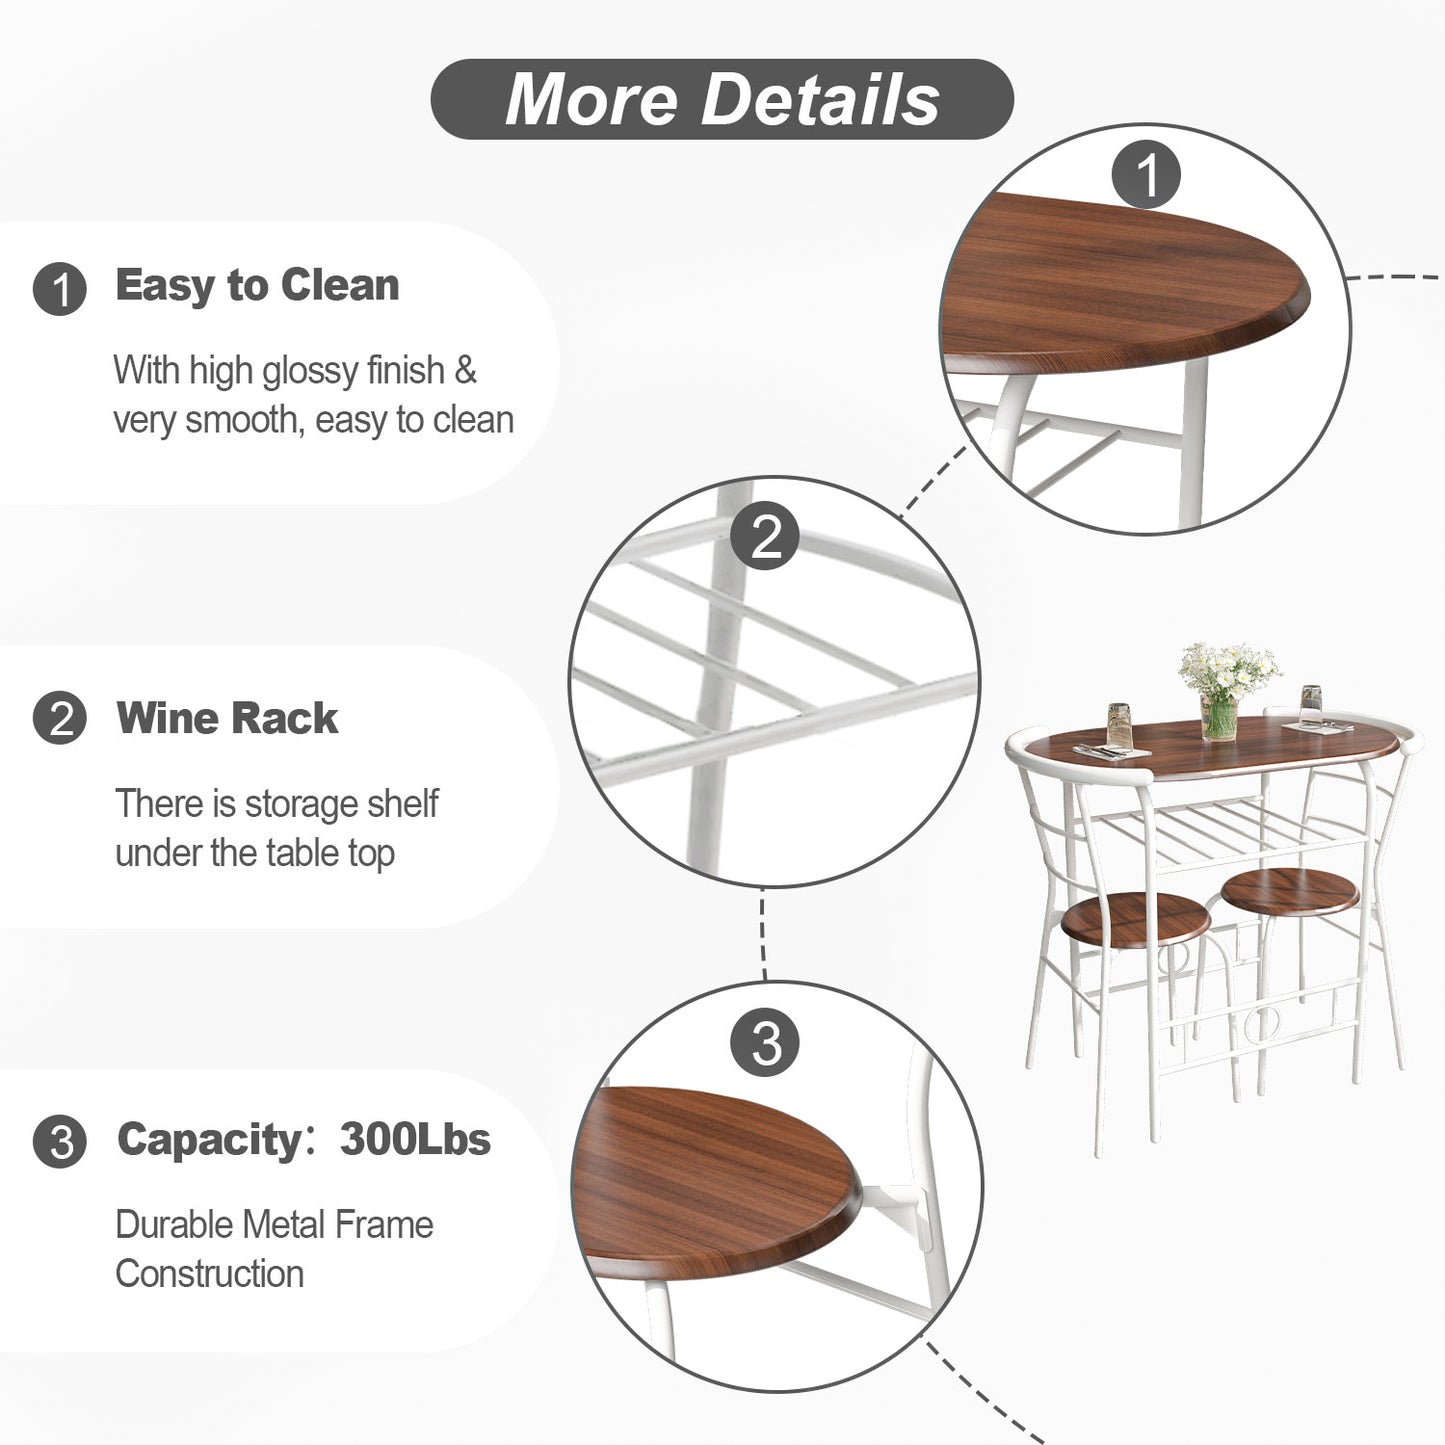 Space Saving Table Set Round Bistro Table Set Kitchen Rack Table and Wooden Chairs for Small Spaces Outdoor bar Table and Chairs Set, Brown & White, one set of three pcs, Dark Brown